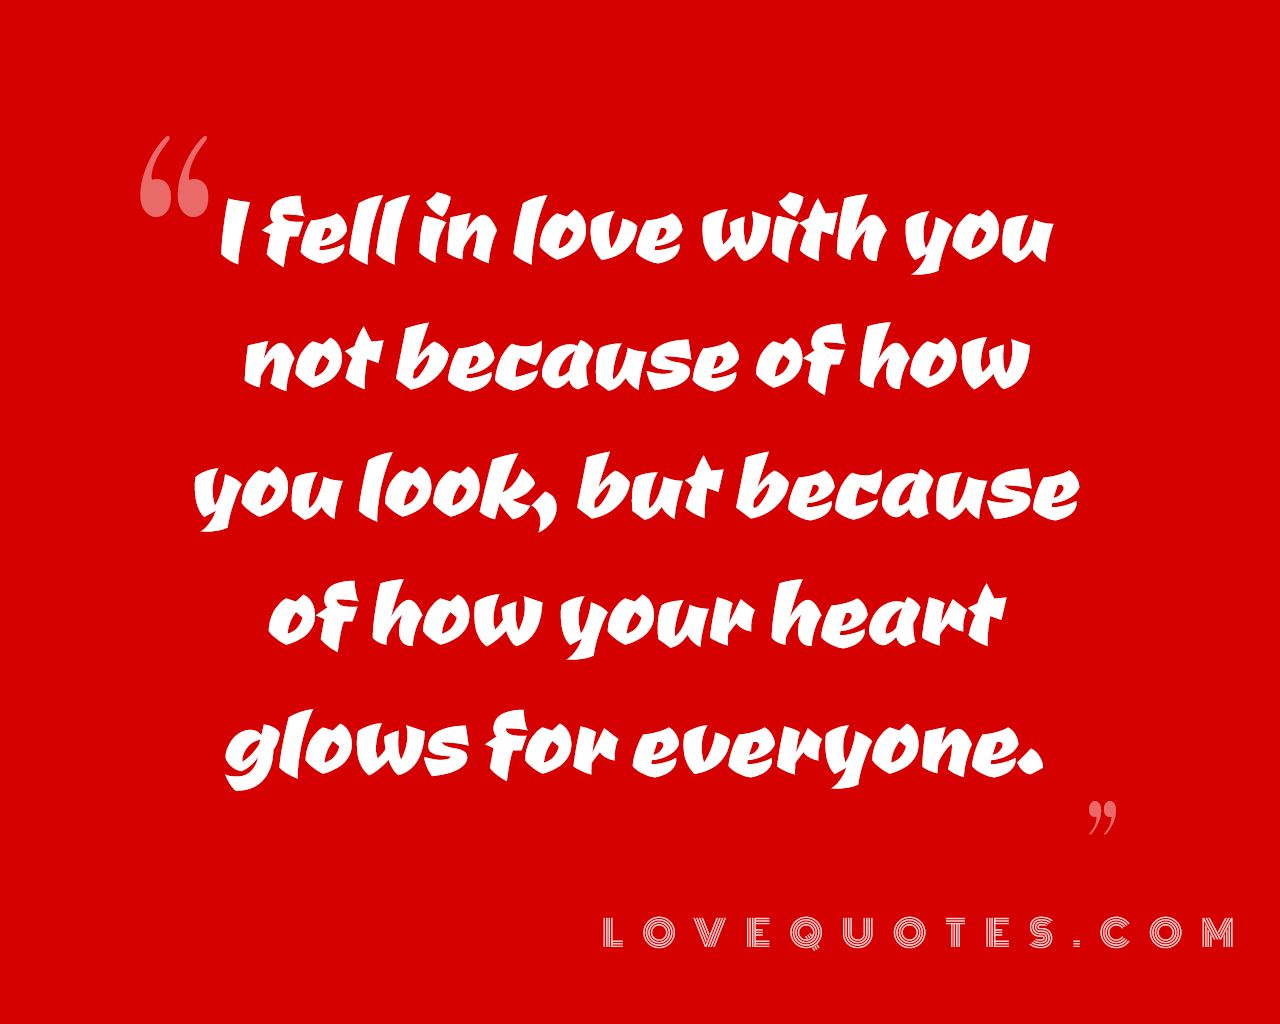 Your Heart Glows